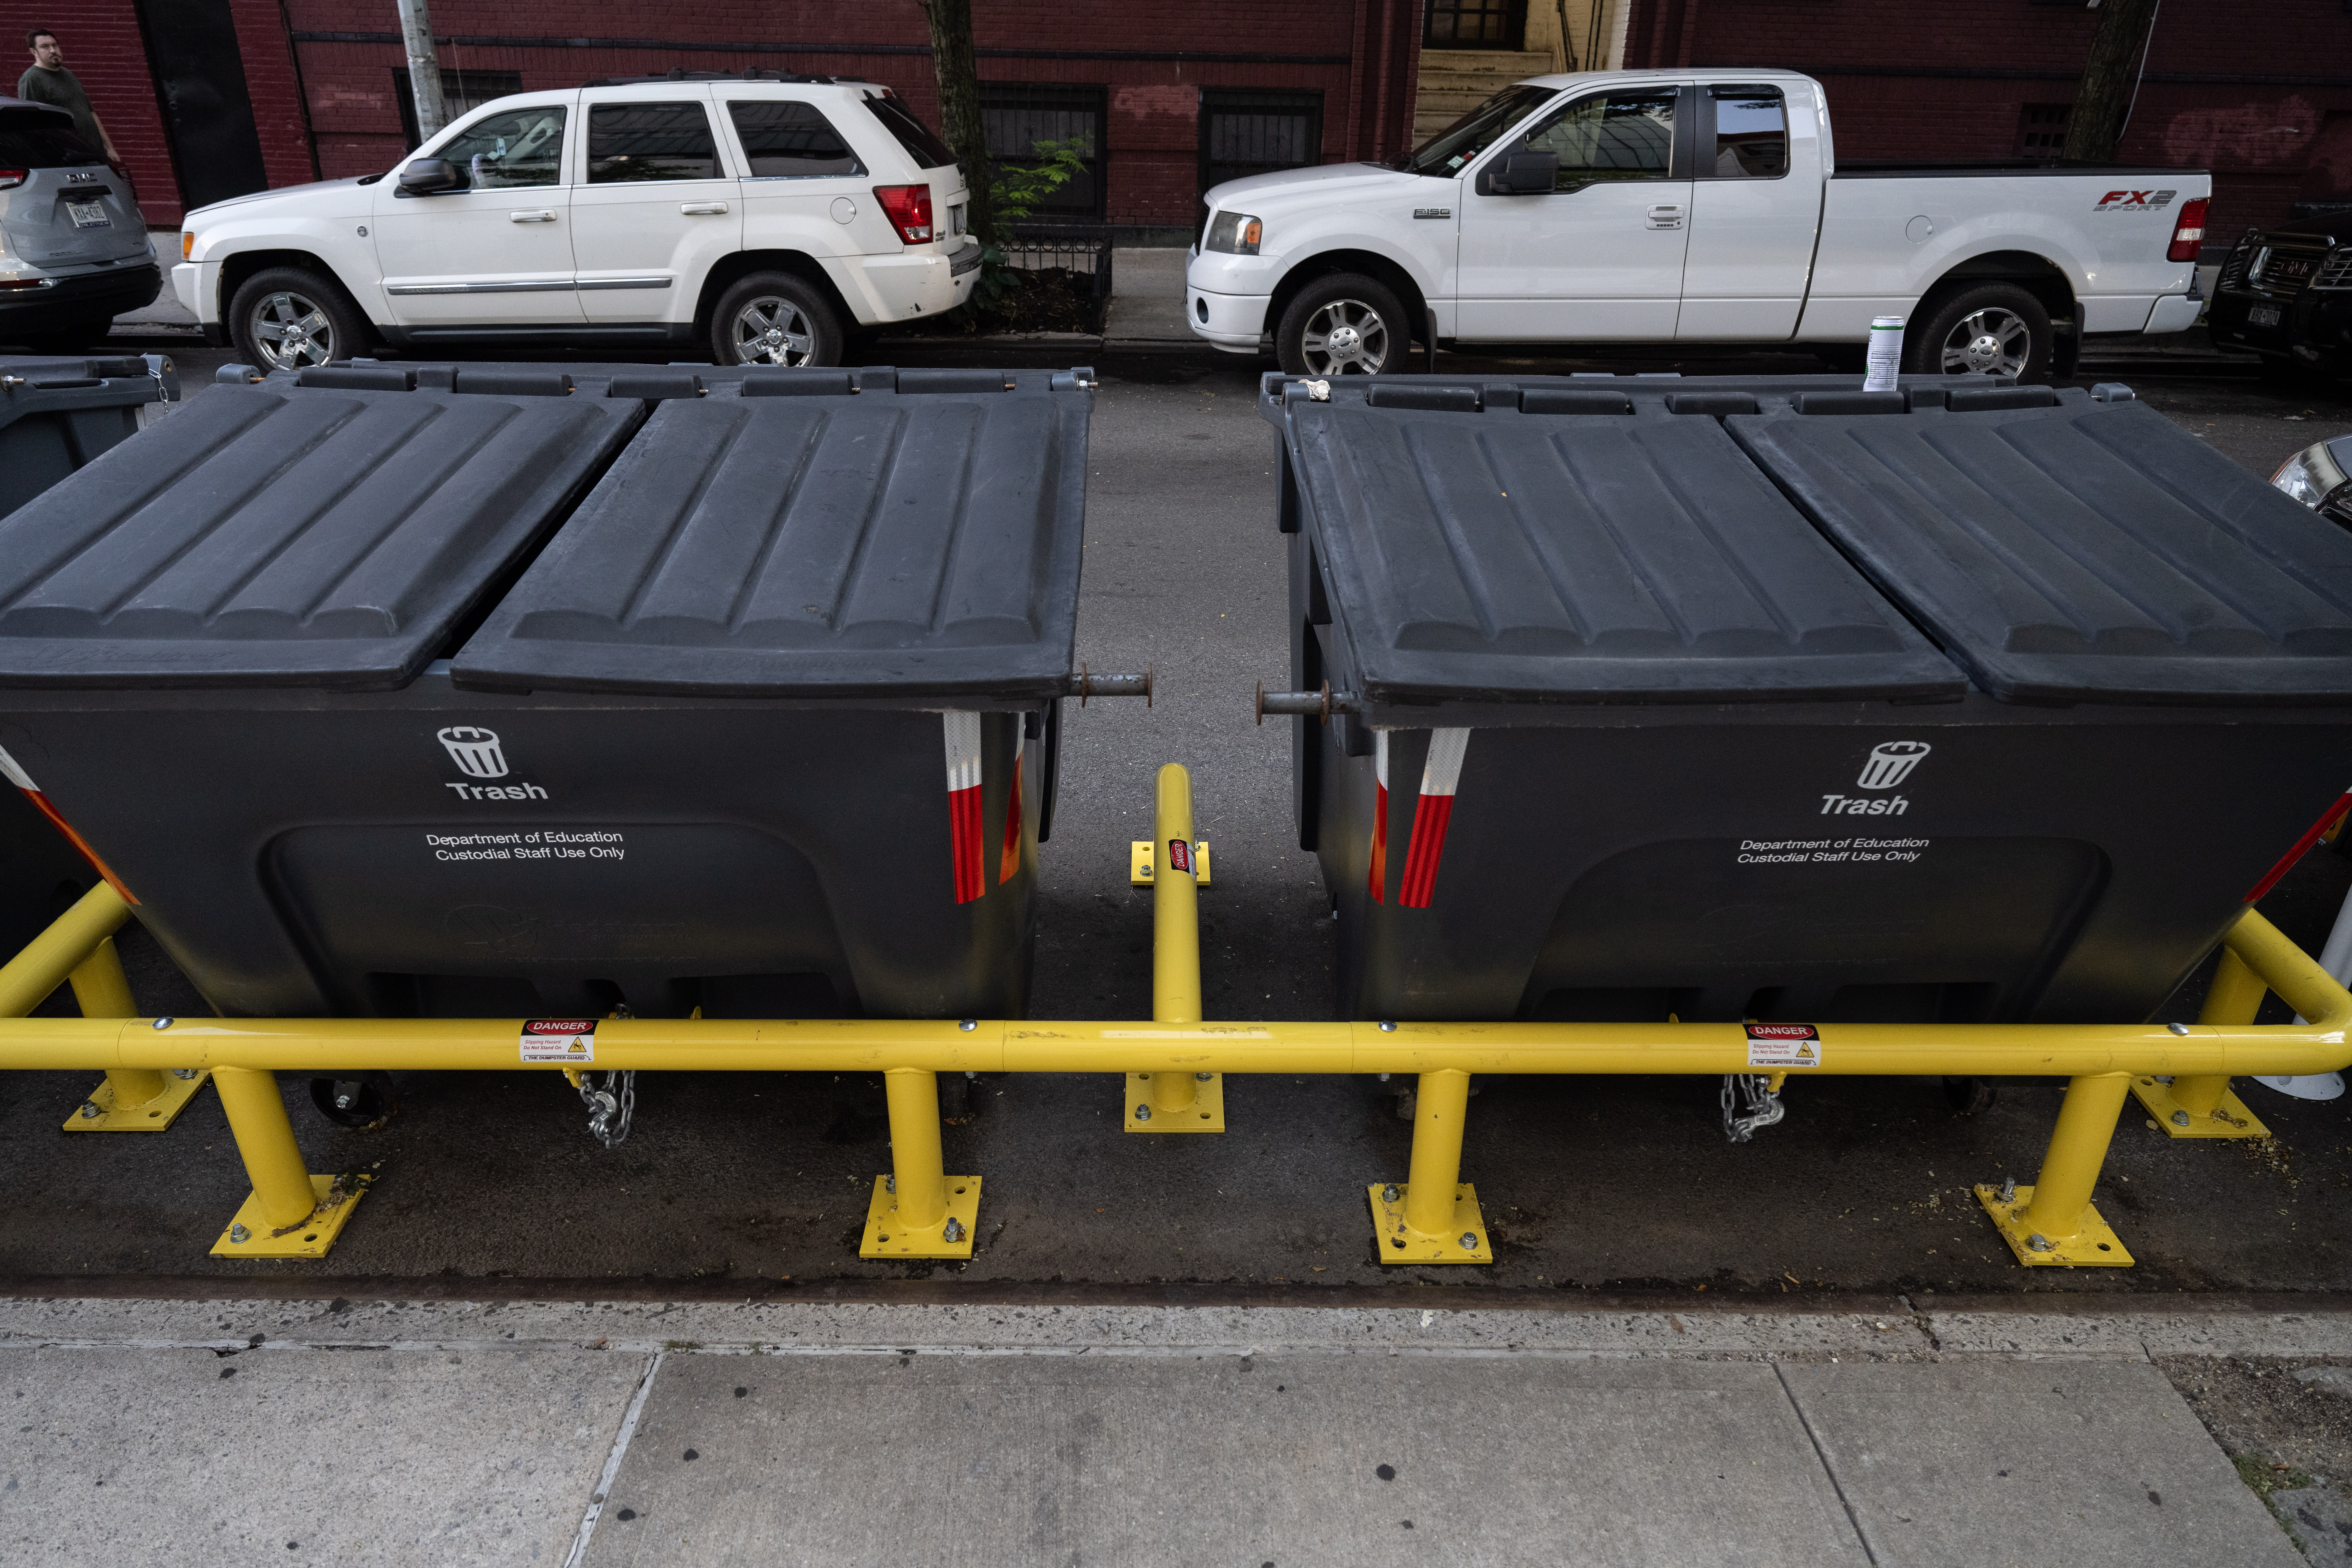 To fight rats and trash, NYC trades parking spots for giant trash bins in  Harlem - Gothamist